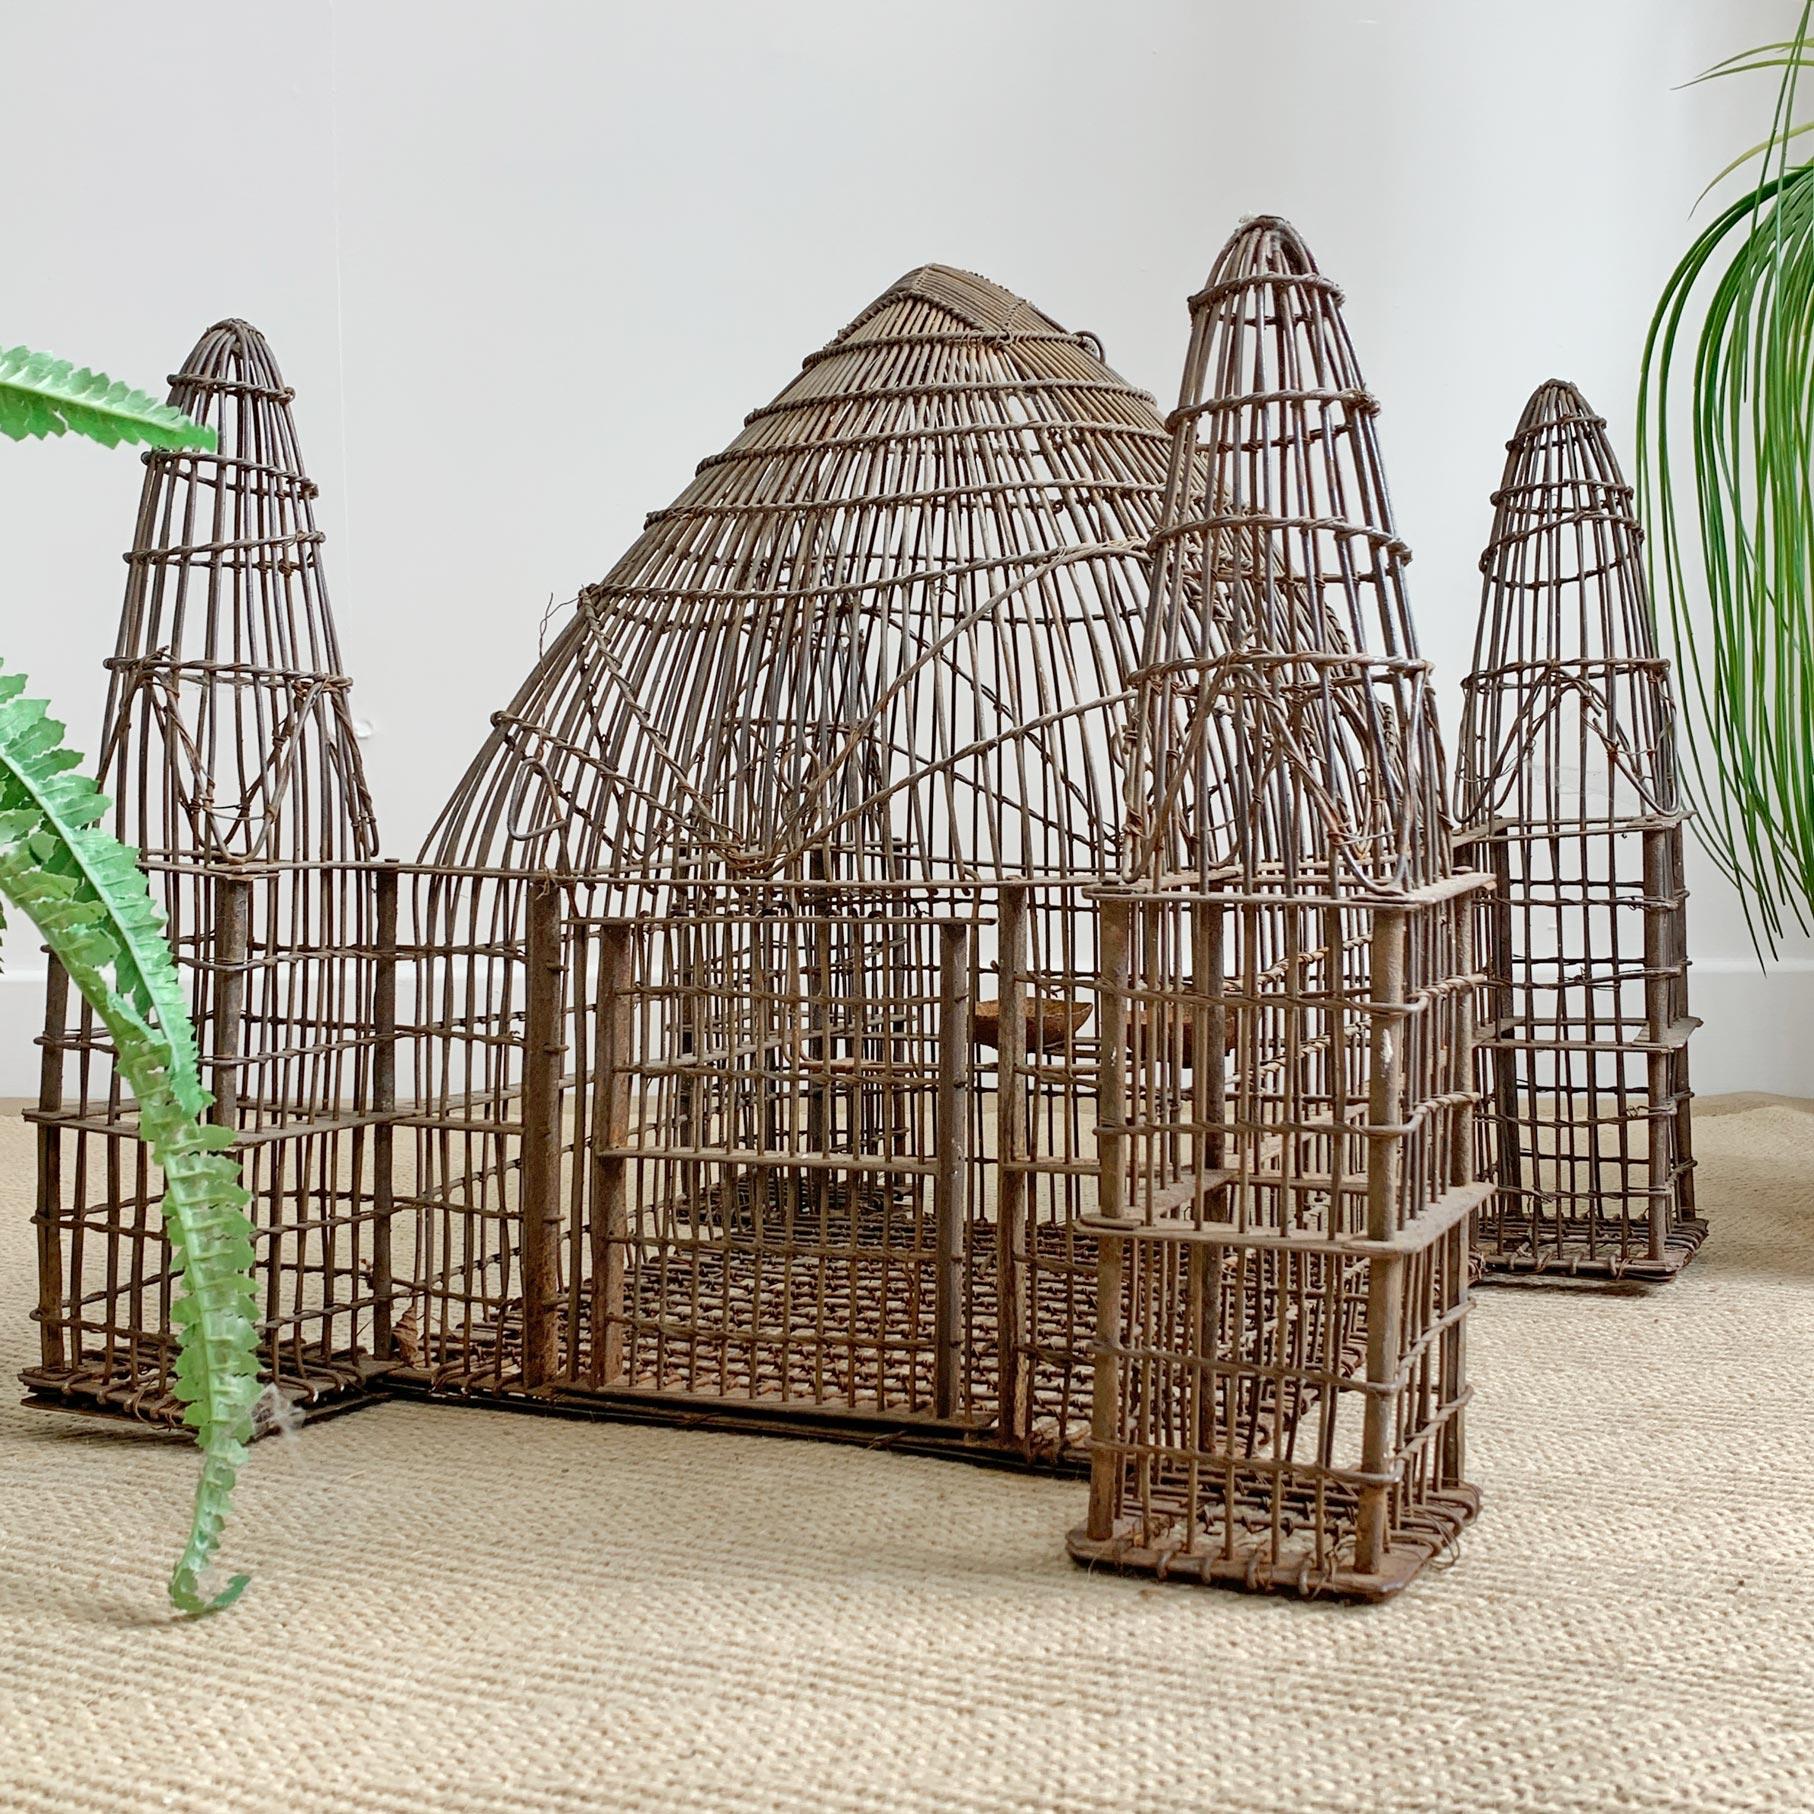 Early 19th century, Anglo-Indian iron bird cage. Fabulous temple shaped design with 4 minarets and one large domed central area.
Superb craftsmanship within the ironwork detailing and finishing.
The door has an fine iron bar which slides within an